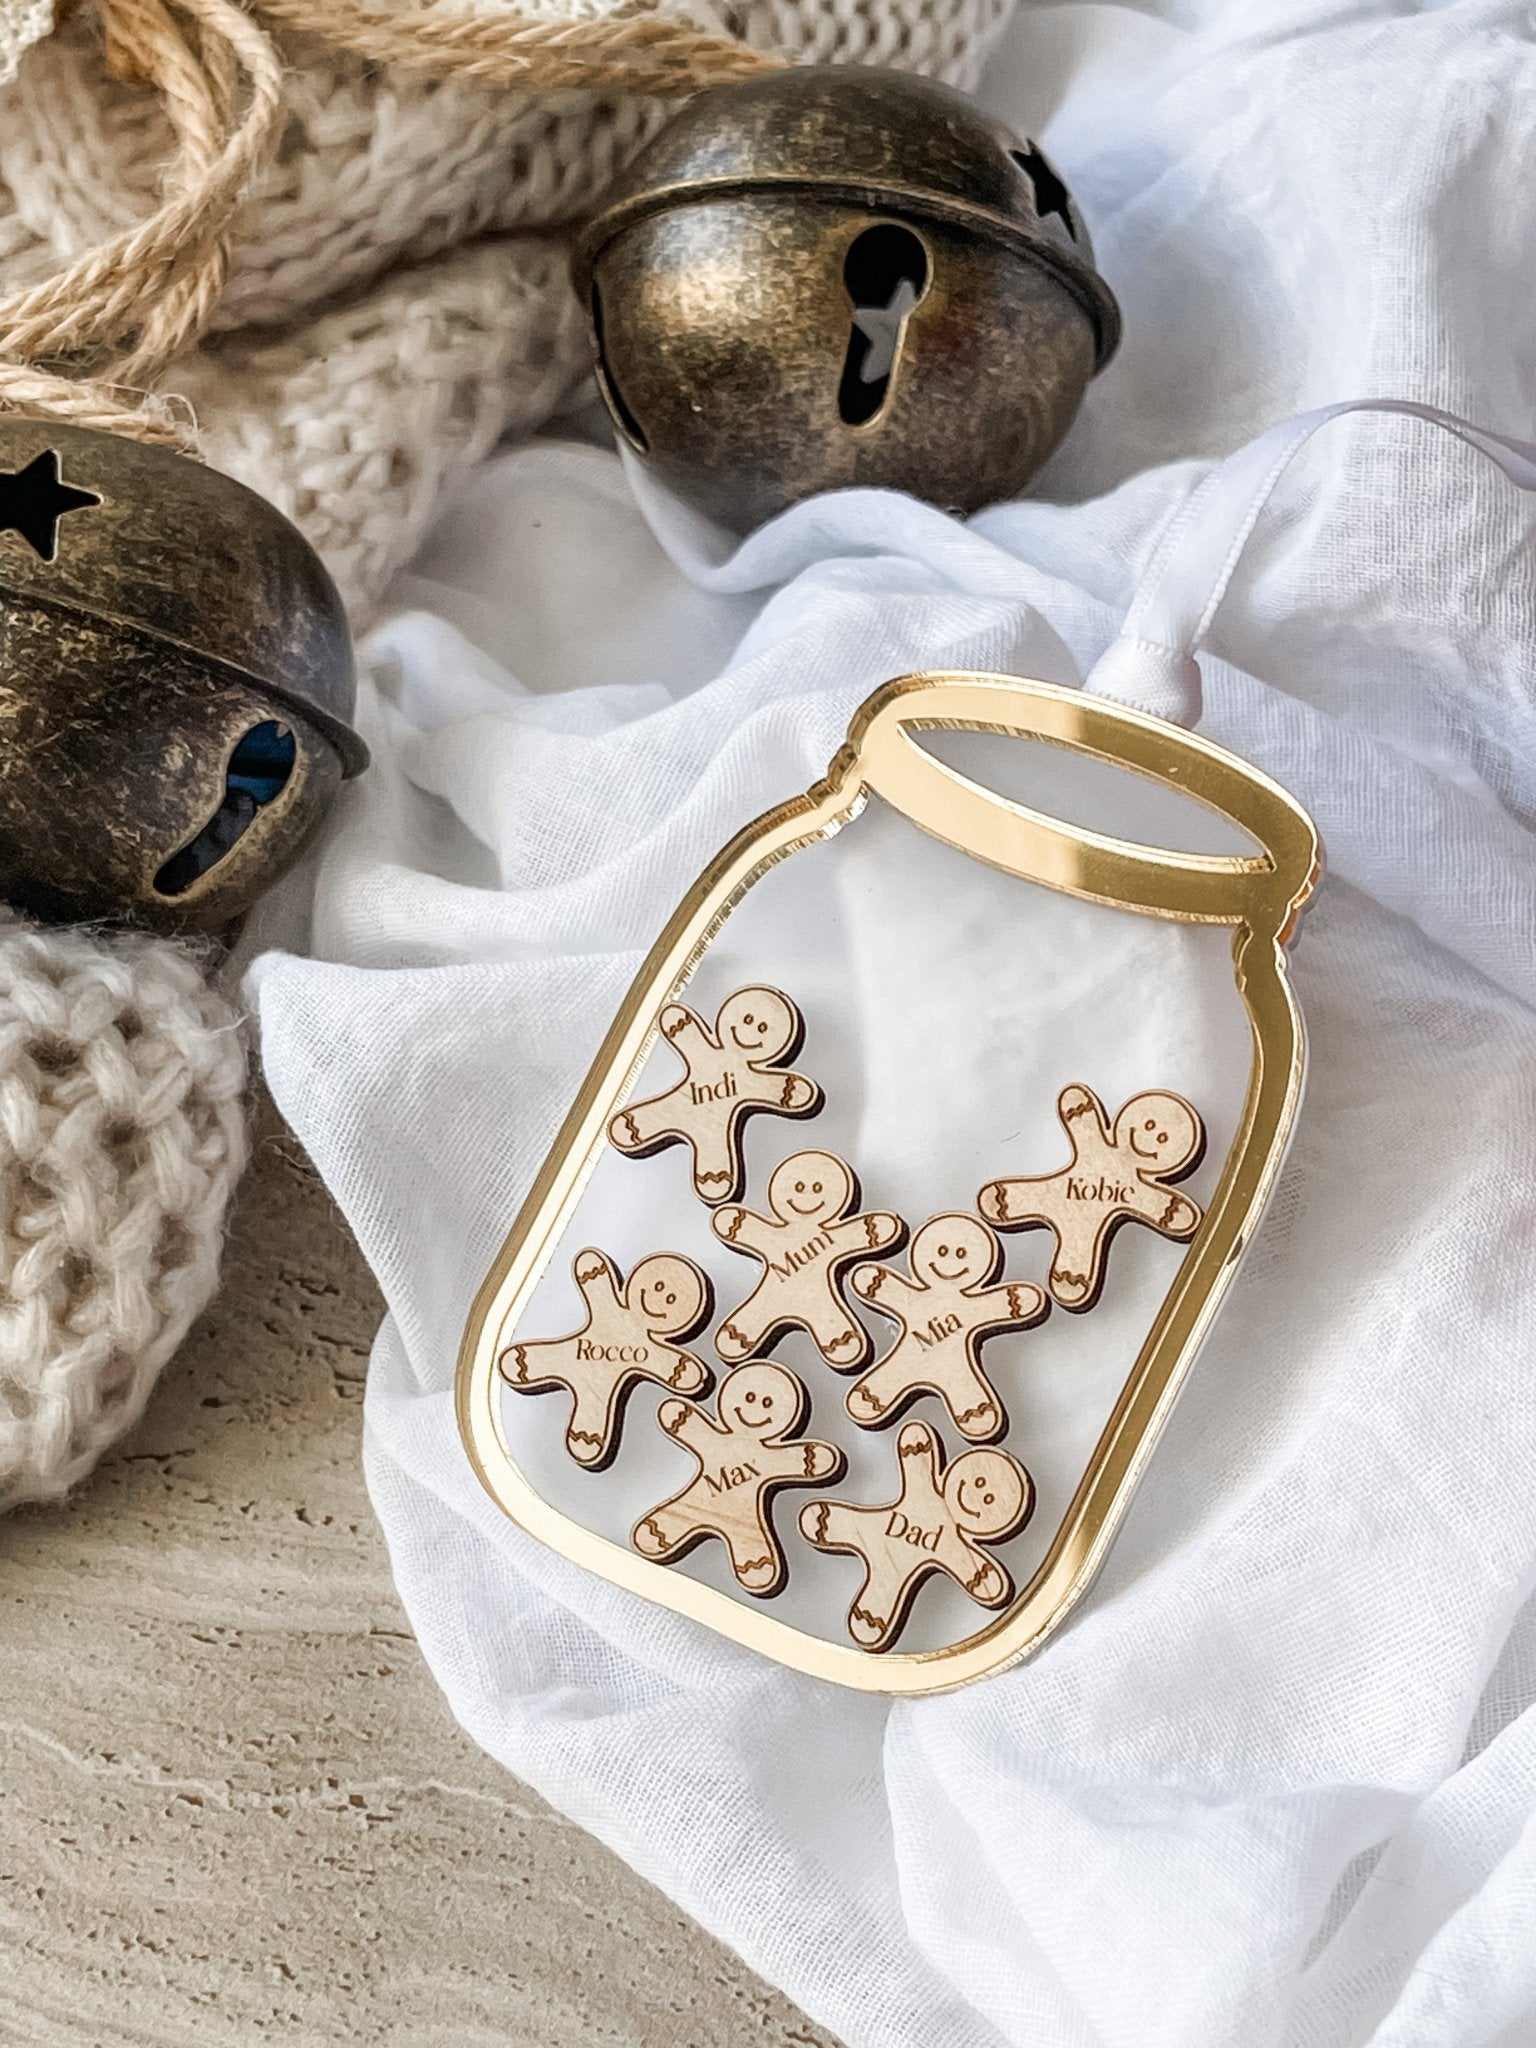 Gingerbread in Jar Christmas Ornament - The Humble Gift Co.